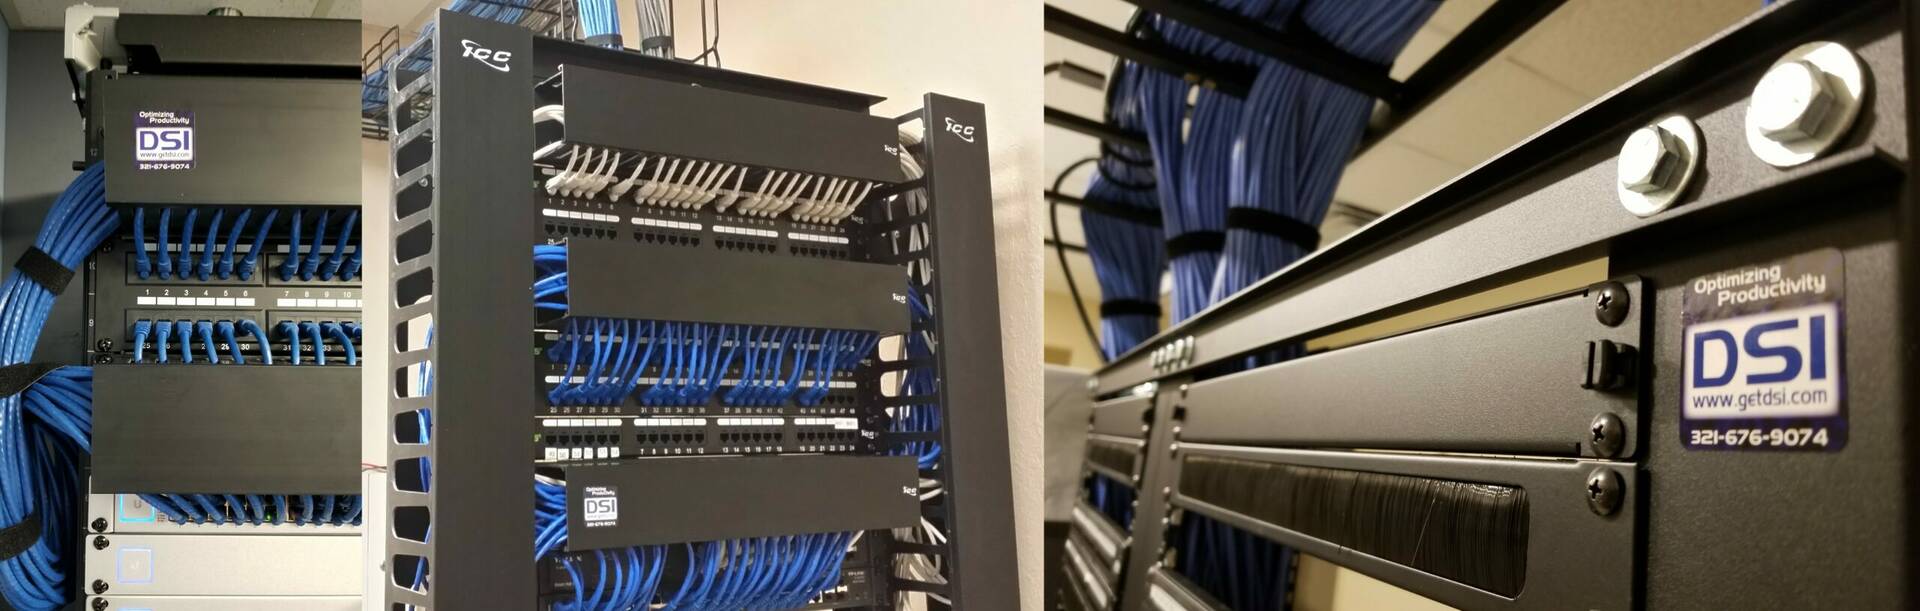 Low Voltage Solutions Structured Cabling Contractor